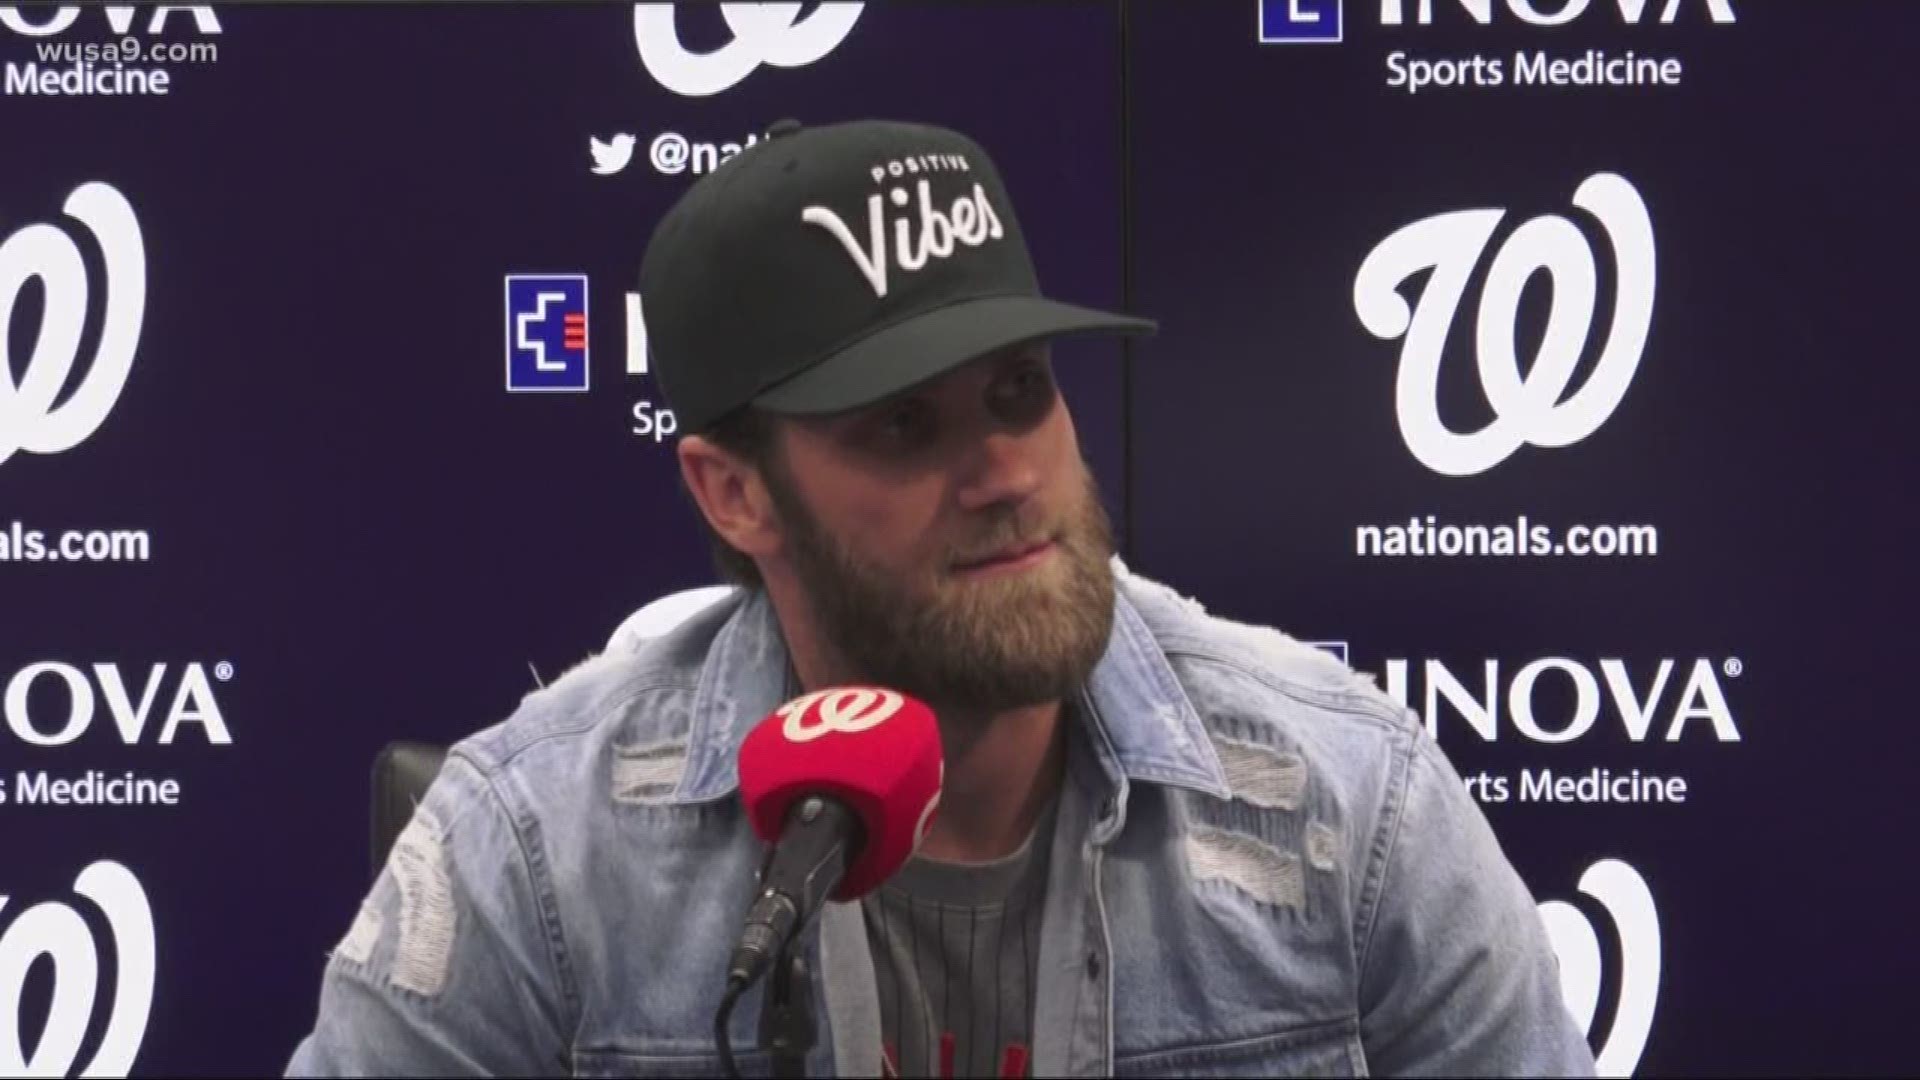 Bryce Harper finally posts his farewell message to Washington Nationals fans  - Federal Baseball